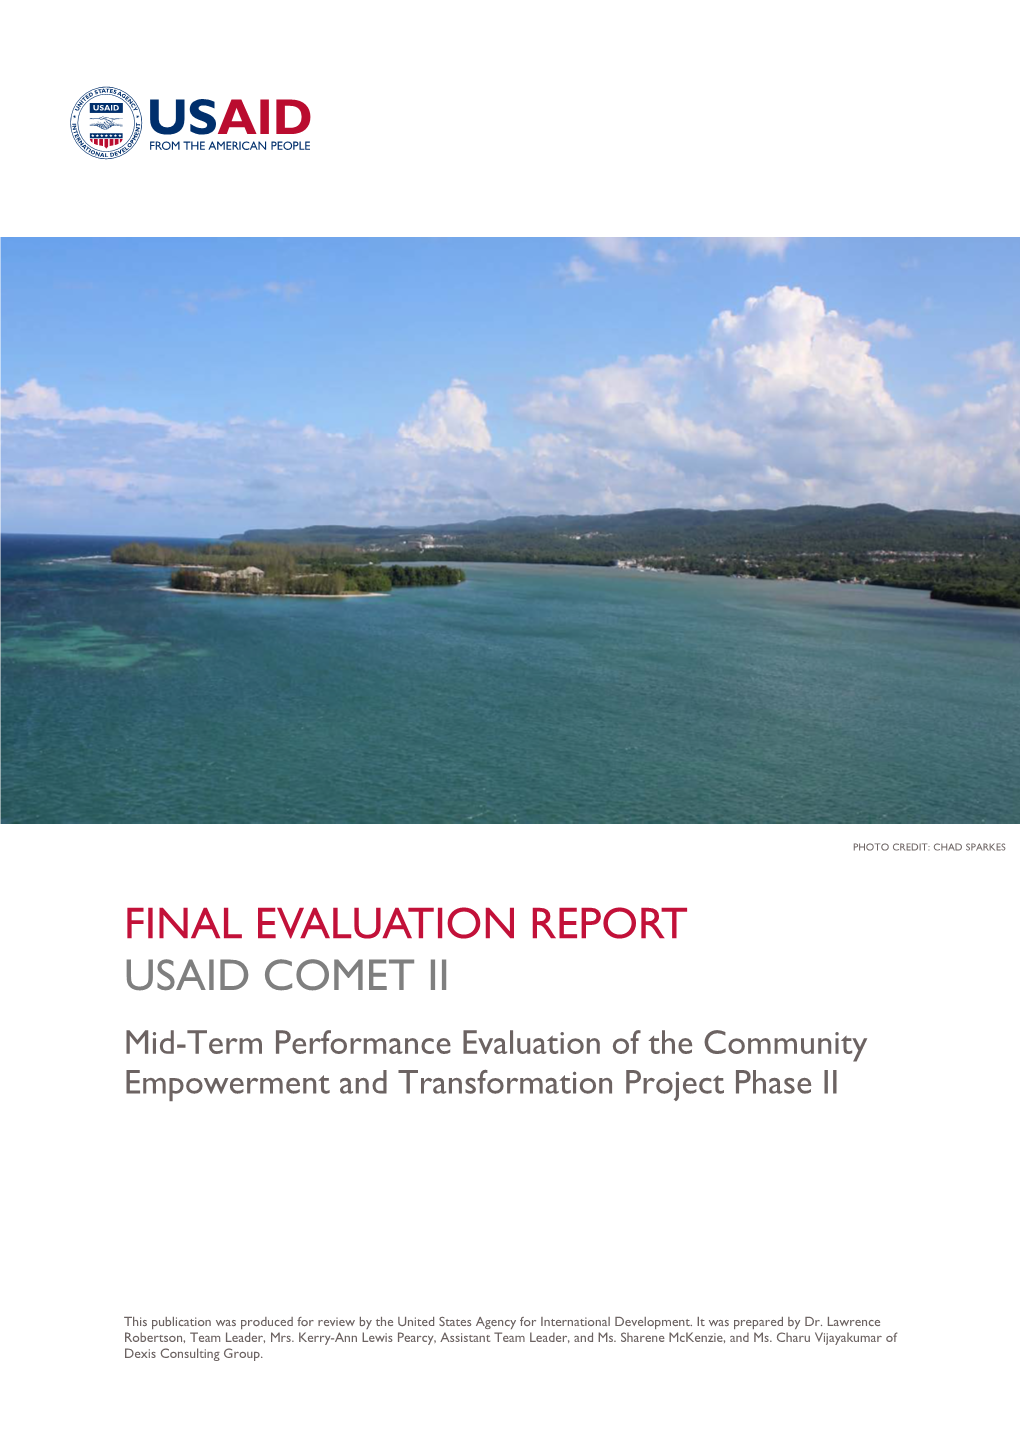 FINAL EVALUATION REPORT USAID COMET II Mid-Term Performance Evaluation of the Community Empowerment and Transformation Project Phase II